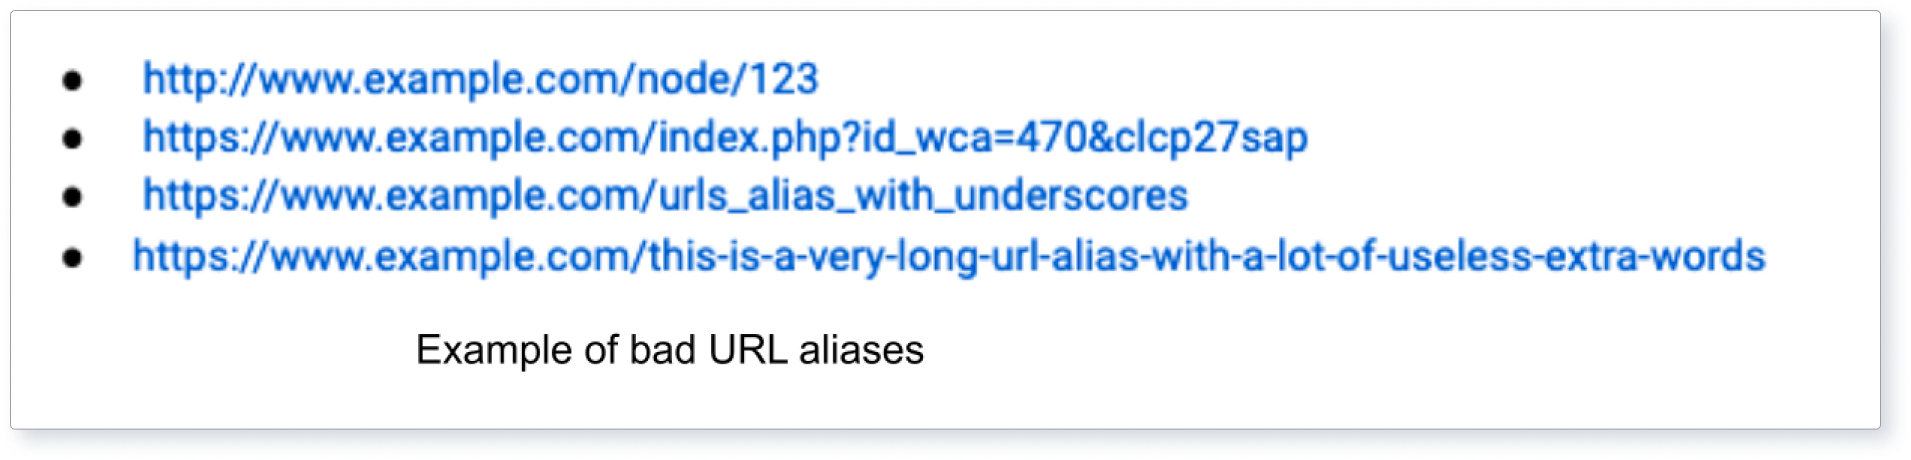 Screenshots showing some examples of ‘good’ and ‘bad’ URLs